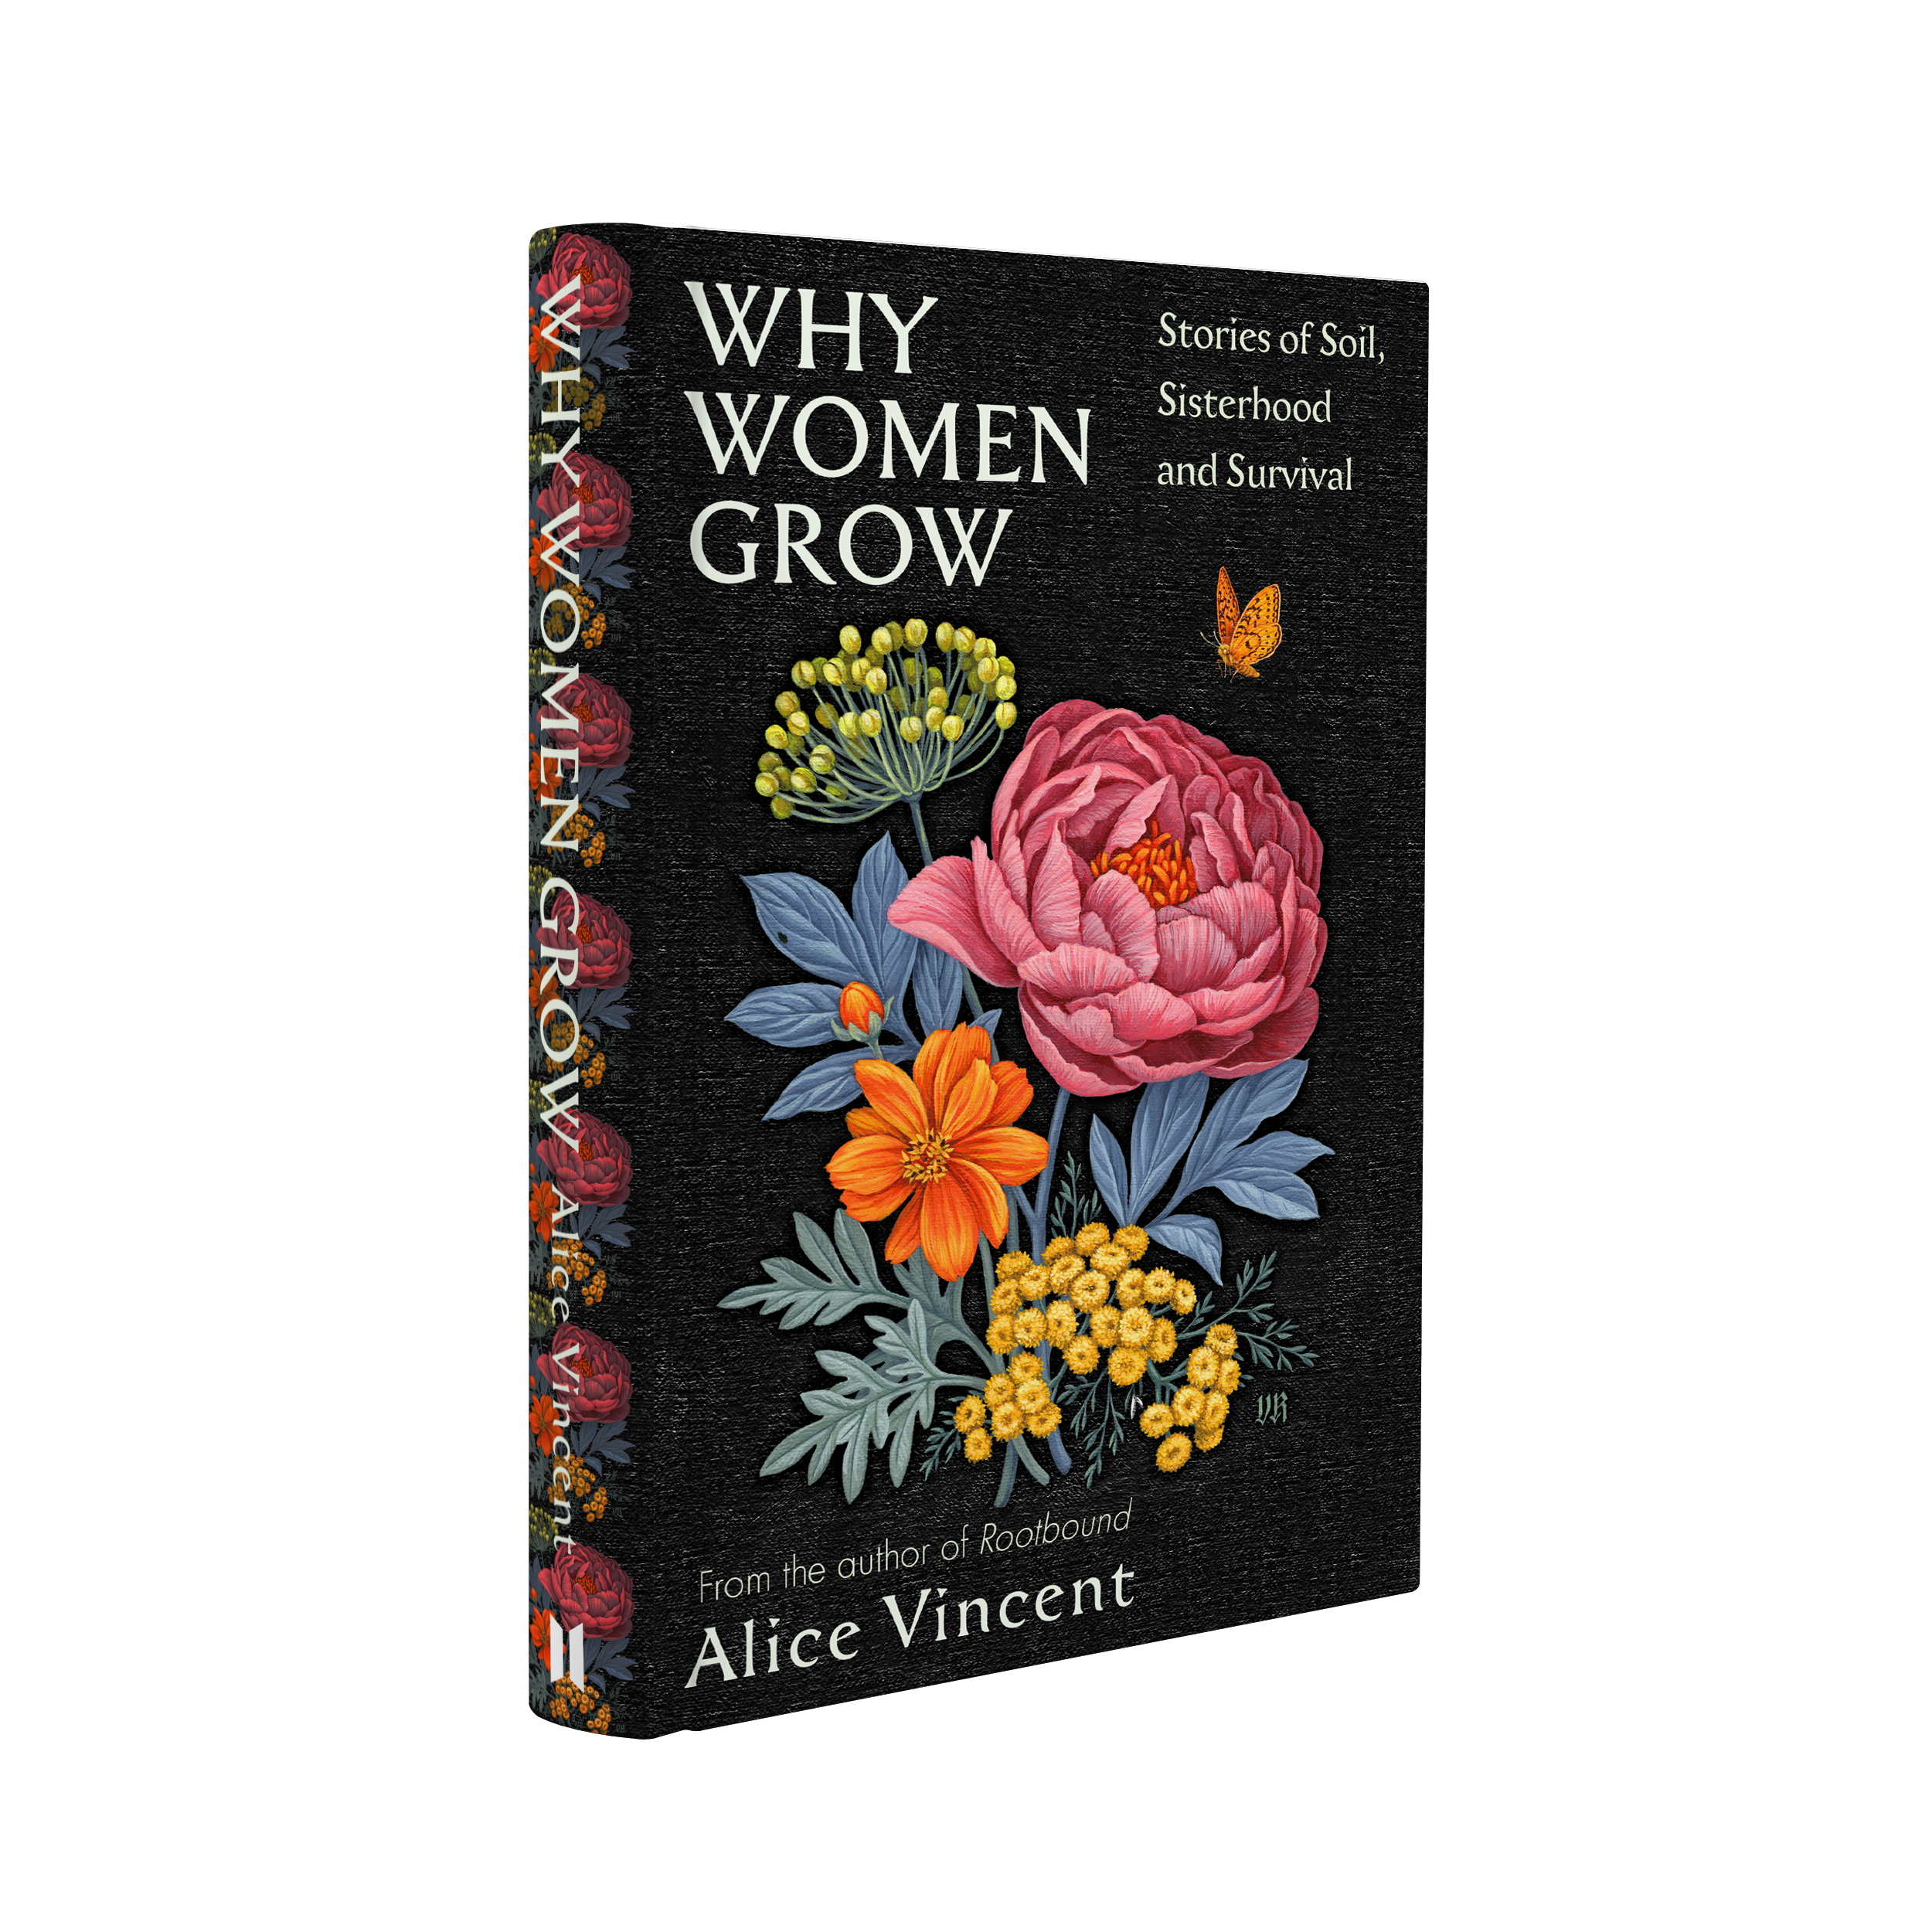 A hardback copy of Why Women Grow by Alice Vincent